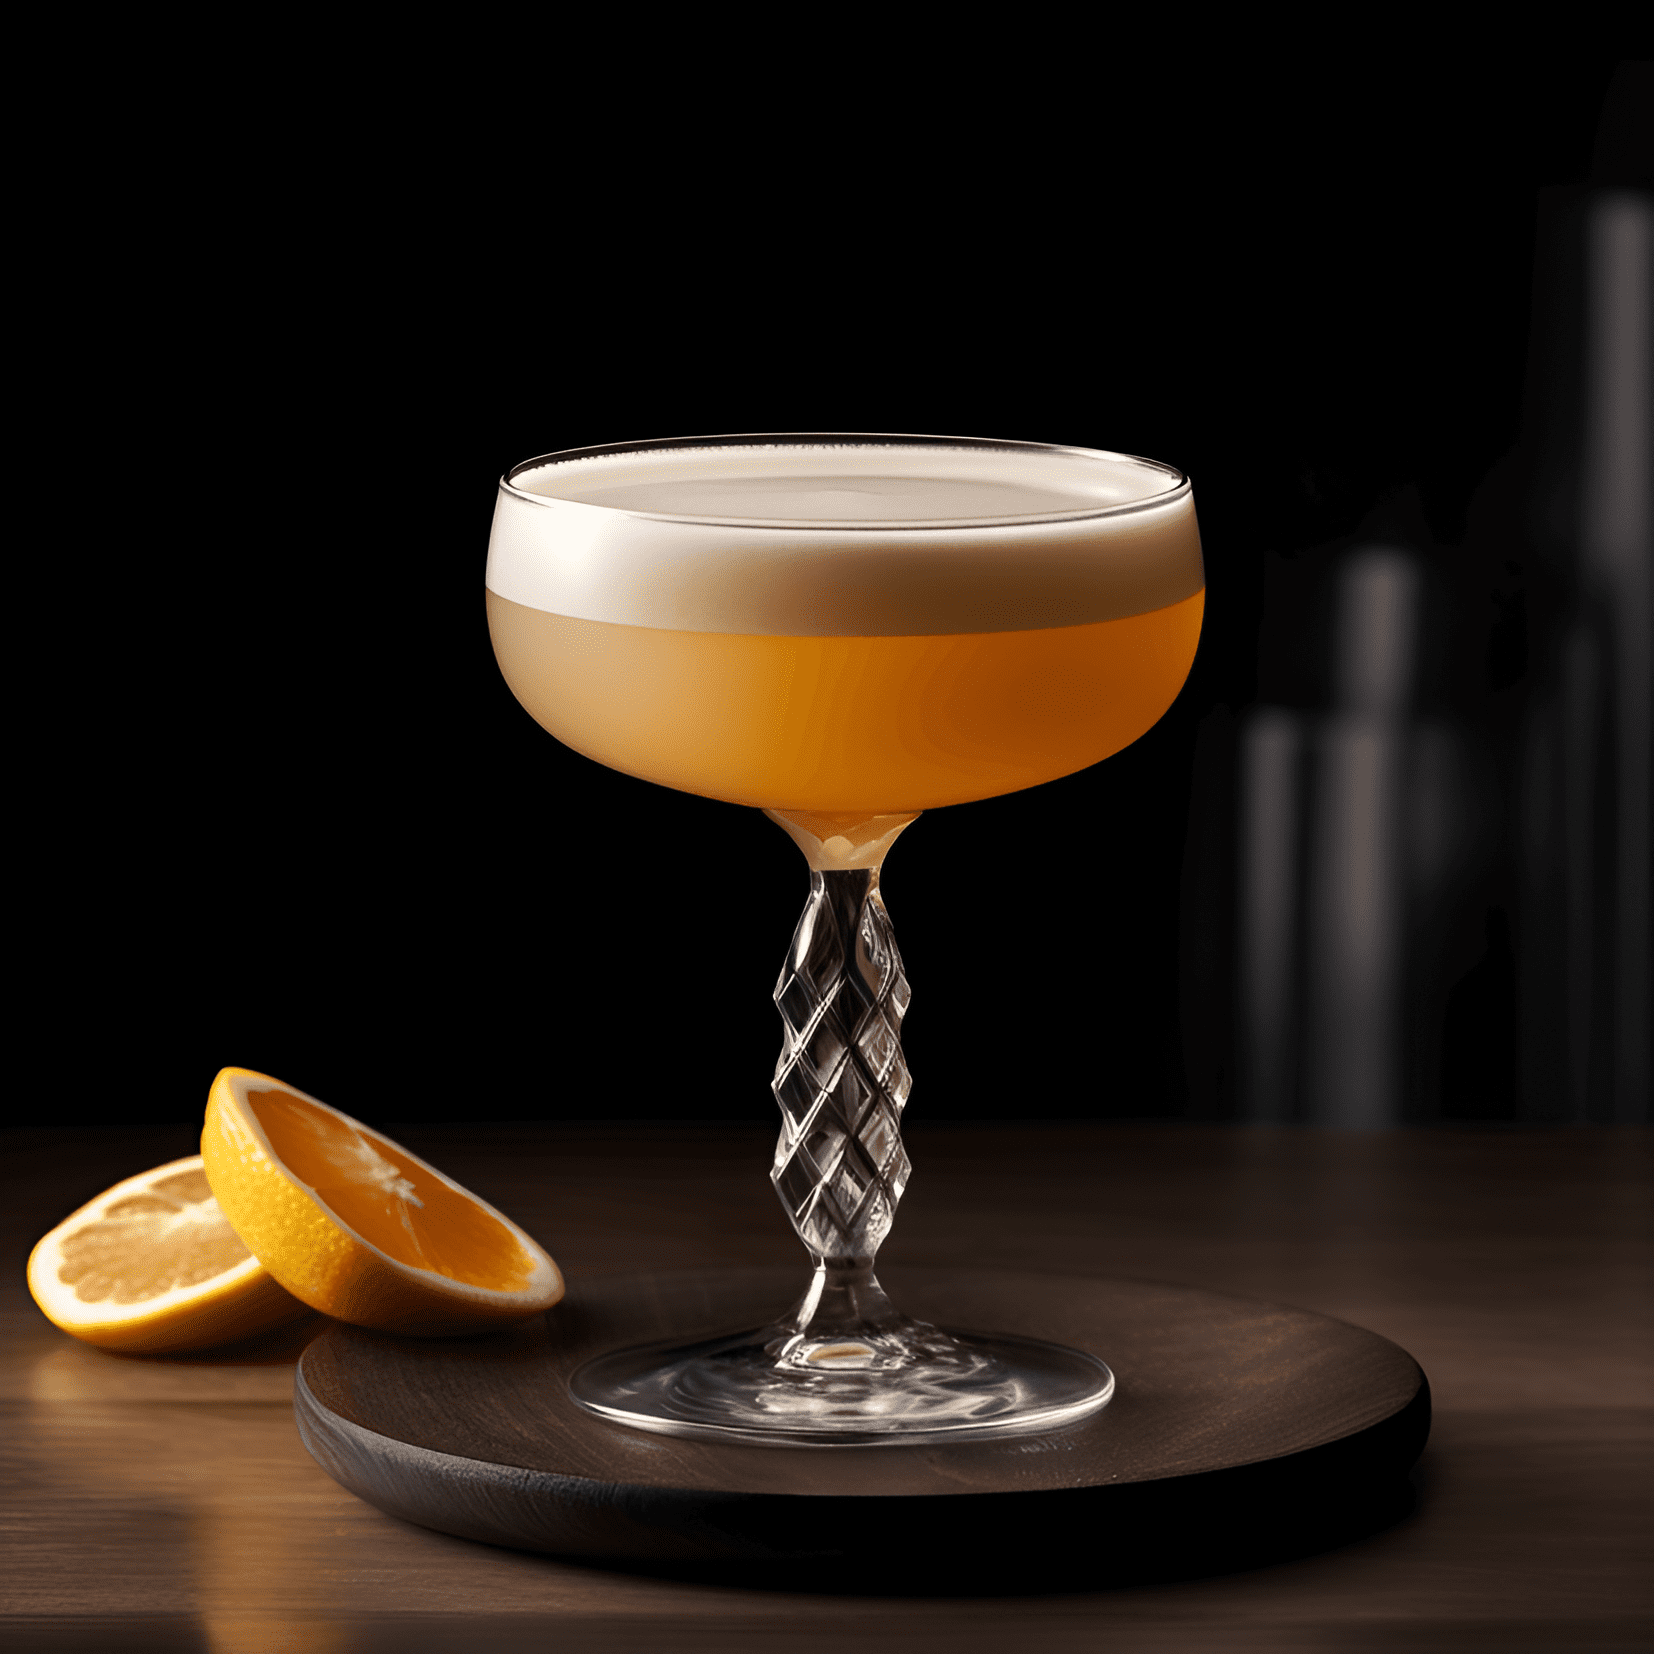 Lady Finger Cocktail Recipe - The Lady Finger cocktail has a delicate and well-balanced taste, with a hint of sweetness. It is light and refreshing, with a subtle fruity flavor from the orange liqueur. The gin adds a touch of herbal complexity, while the egg white gives the drink a smooth and frothy texture.